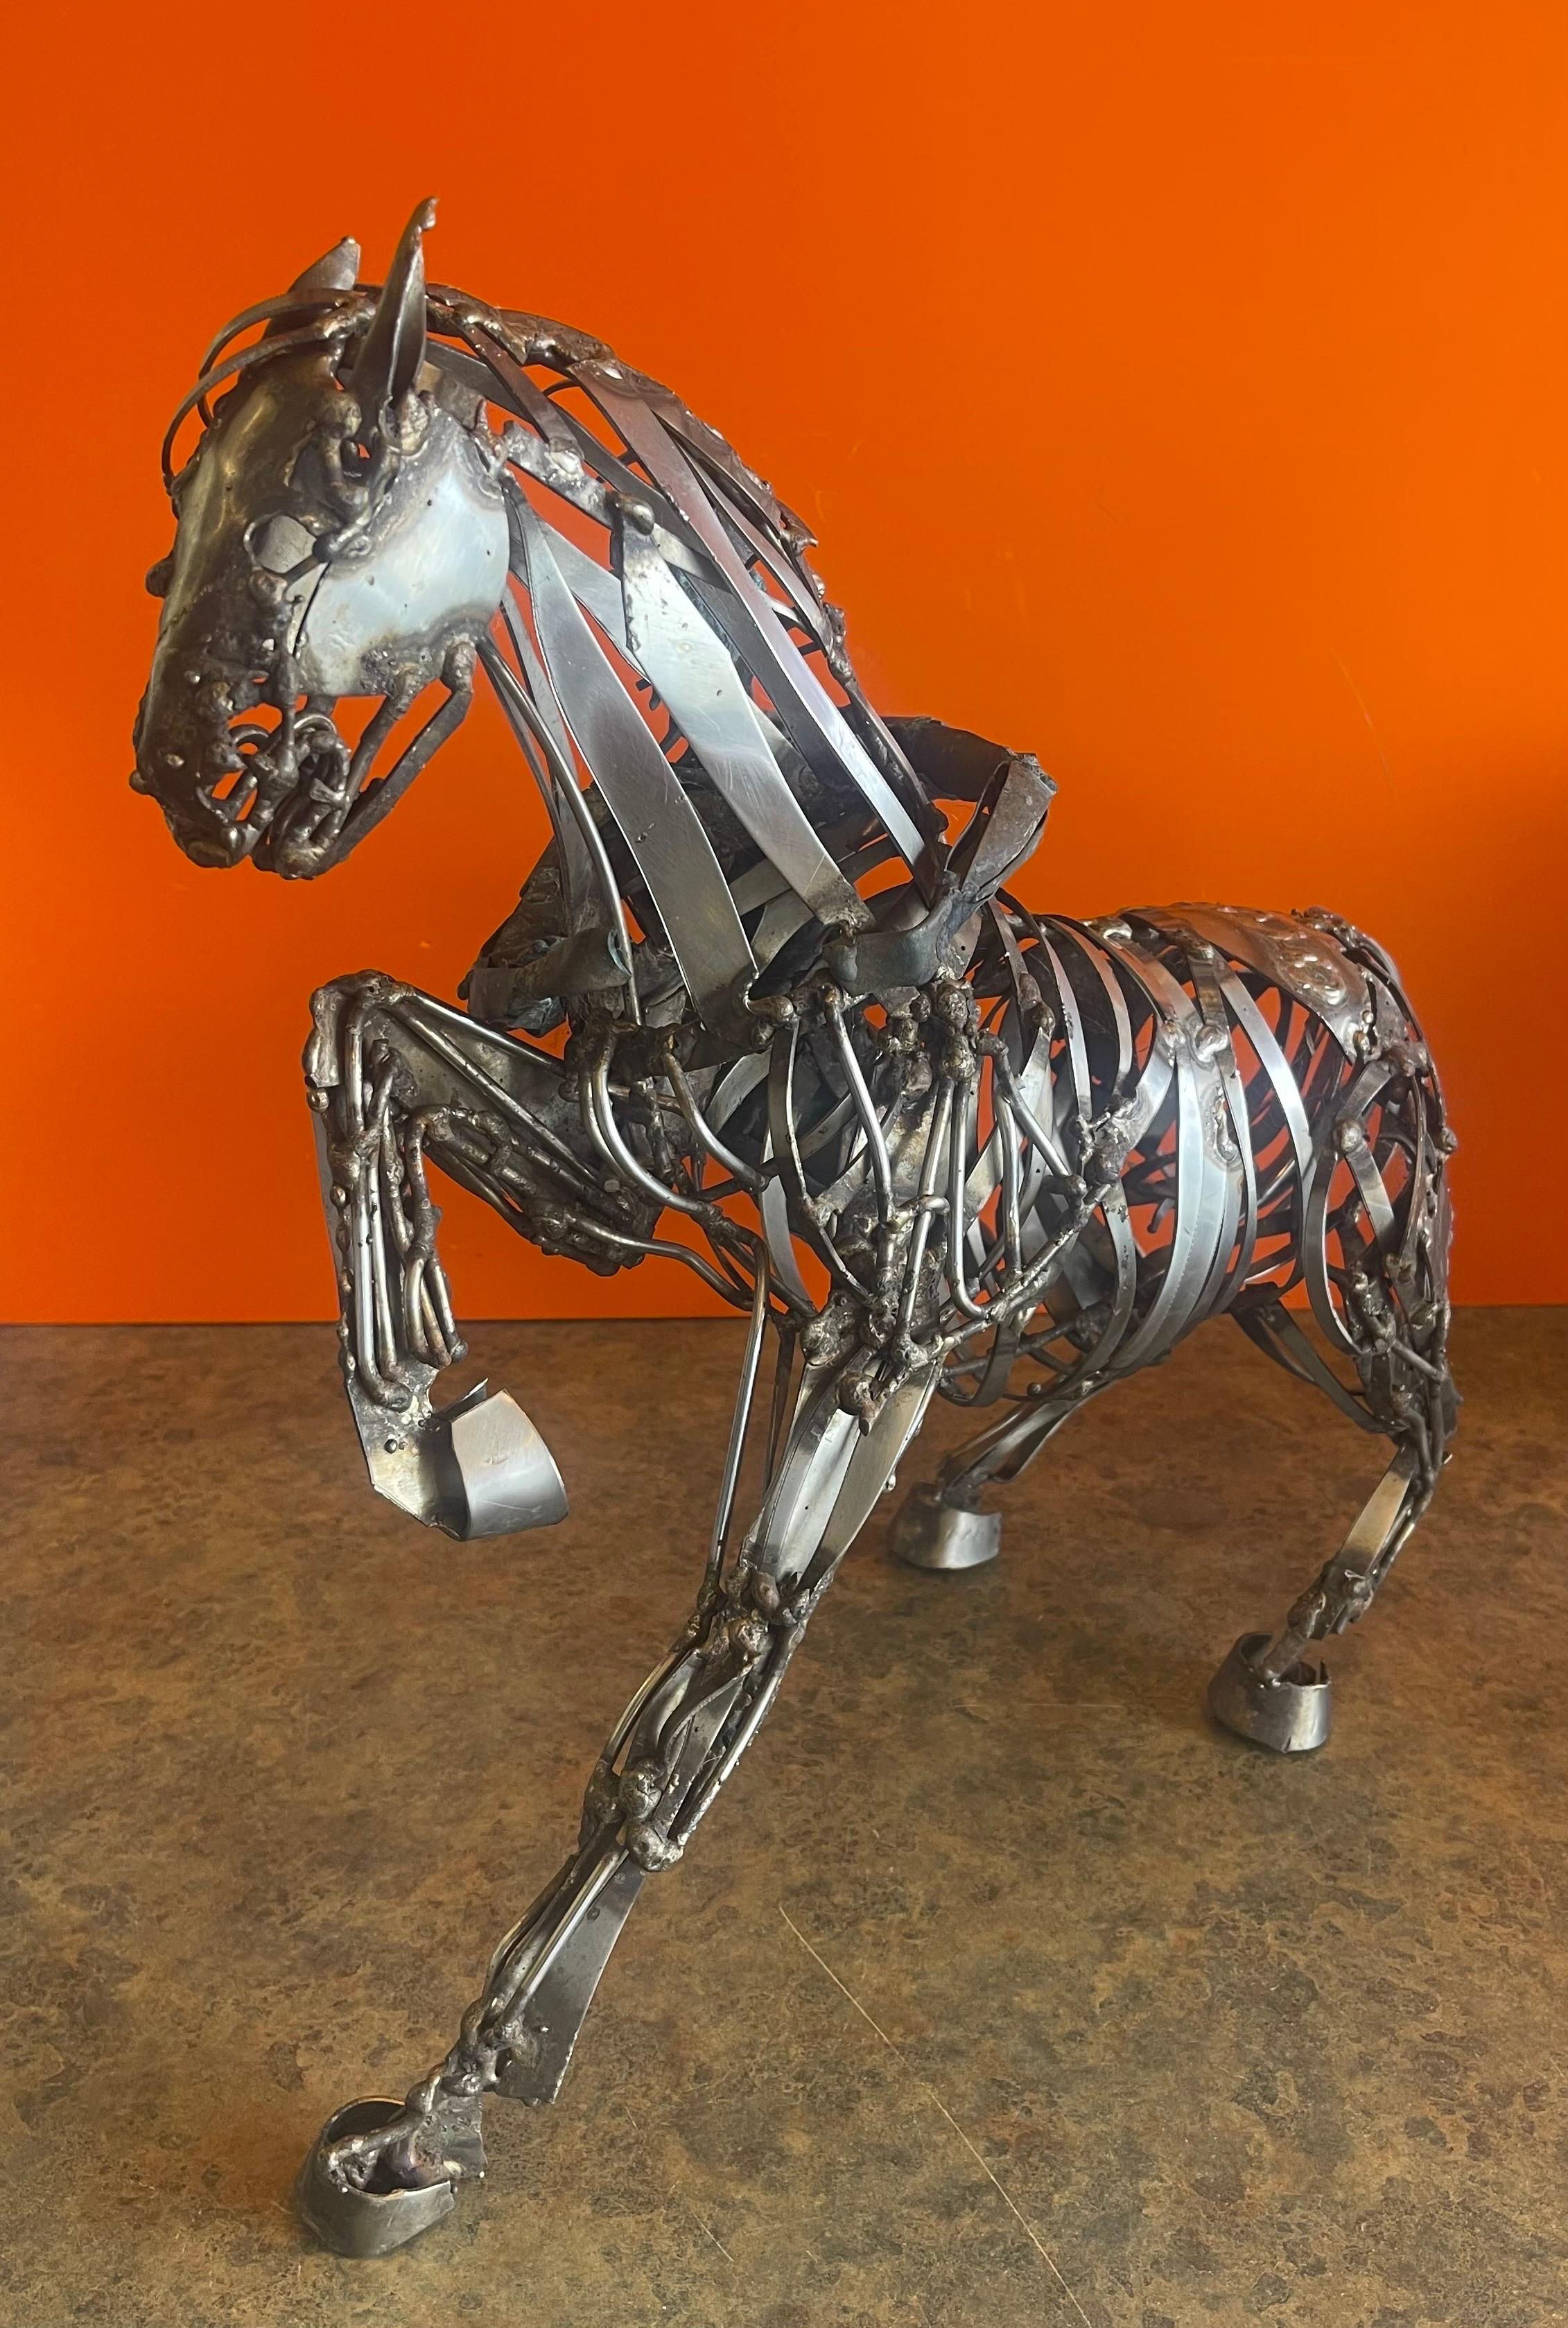 A wonderful welded stainless steel and bronze rider and horse sculpture in the style of Jiang Tie-Feng, circa 1980s. The piece has a fabulous look and patina and is signed on the back of the horse (very difficult to make out the signature). The